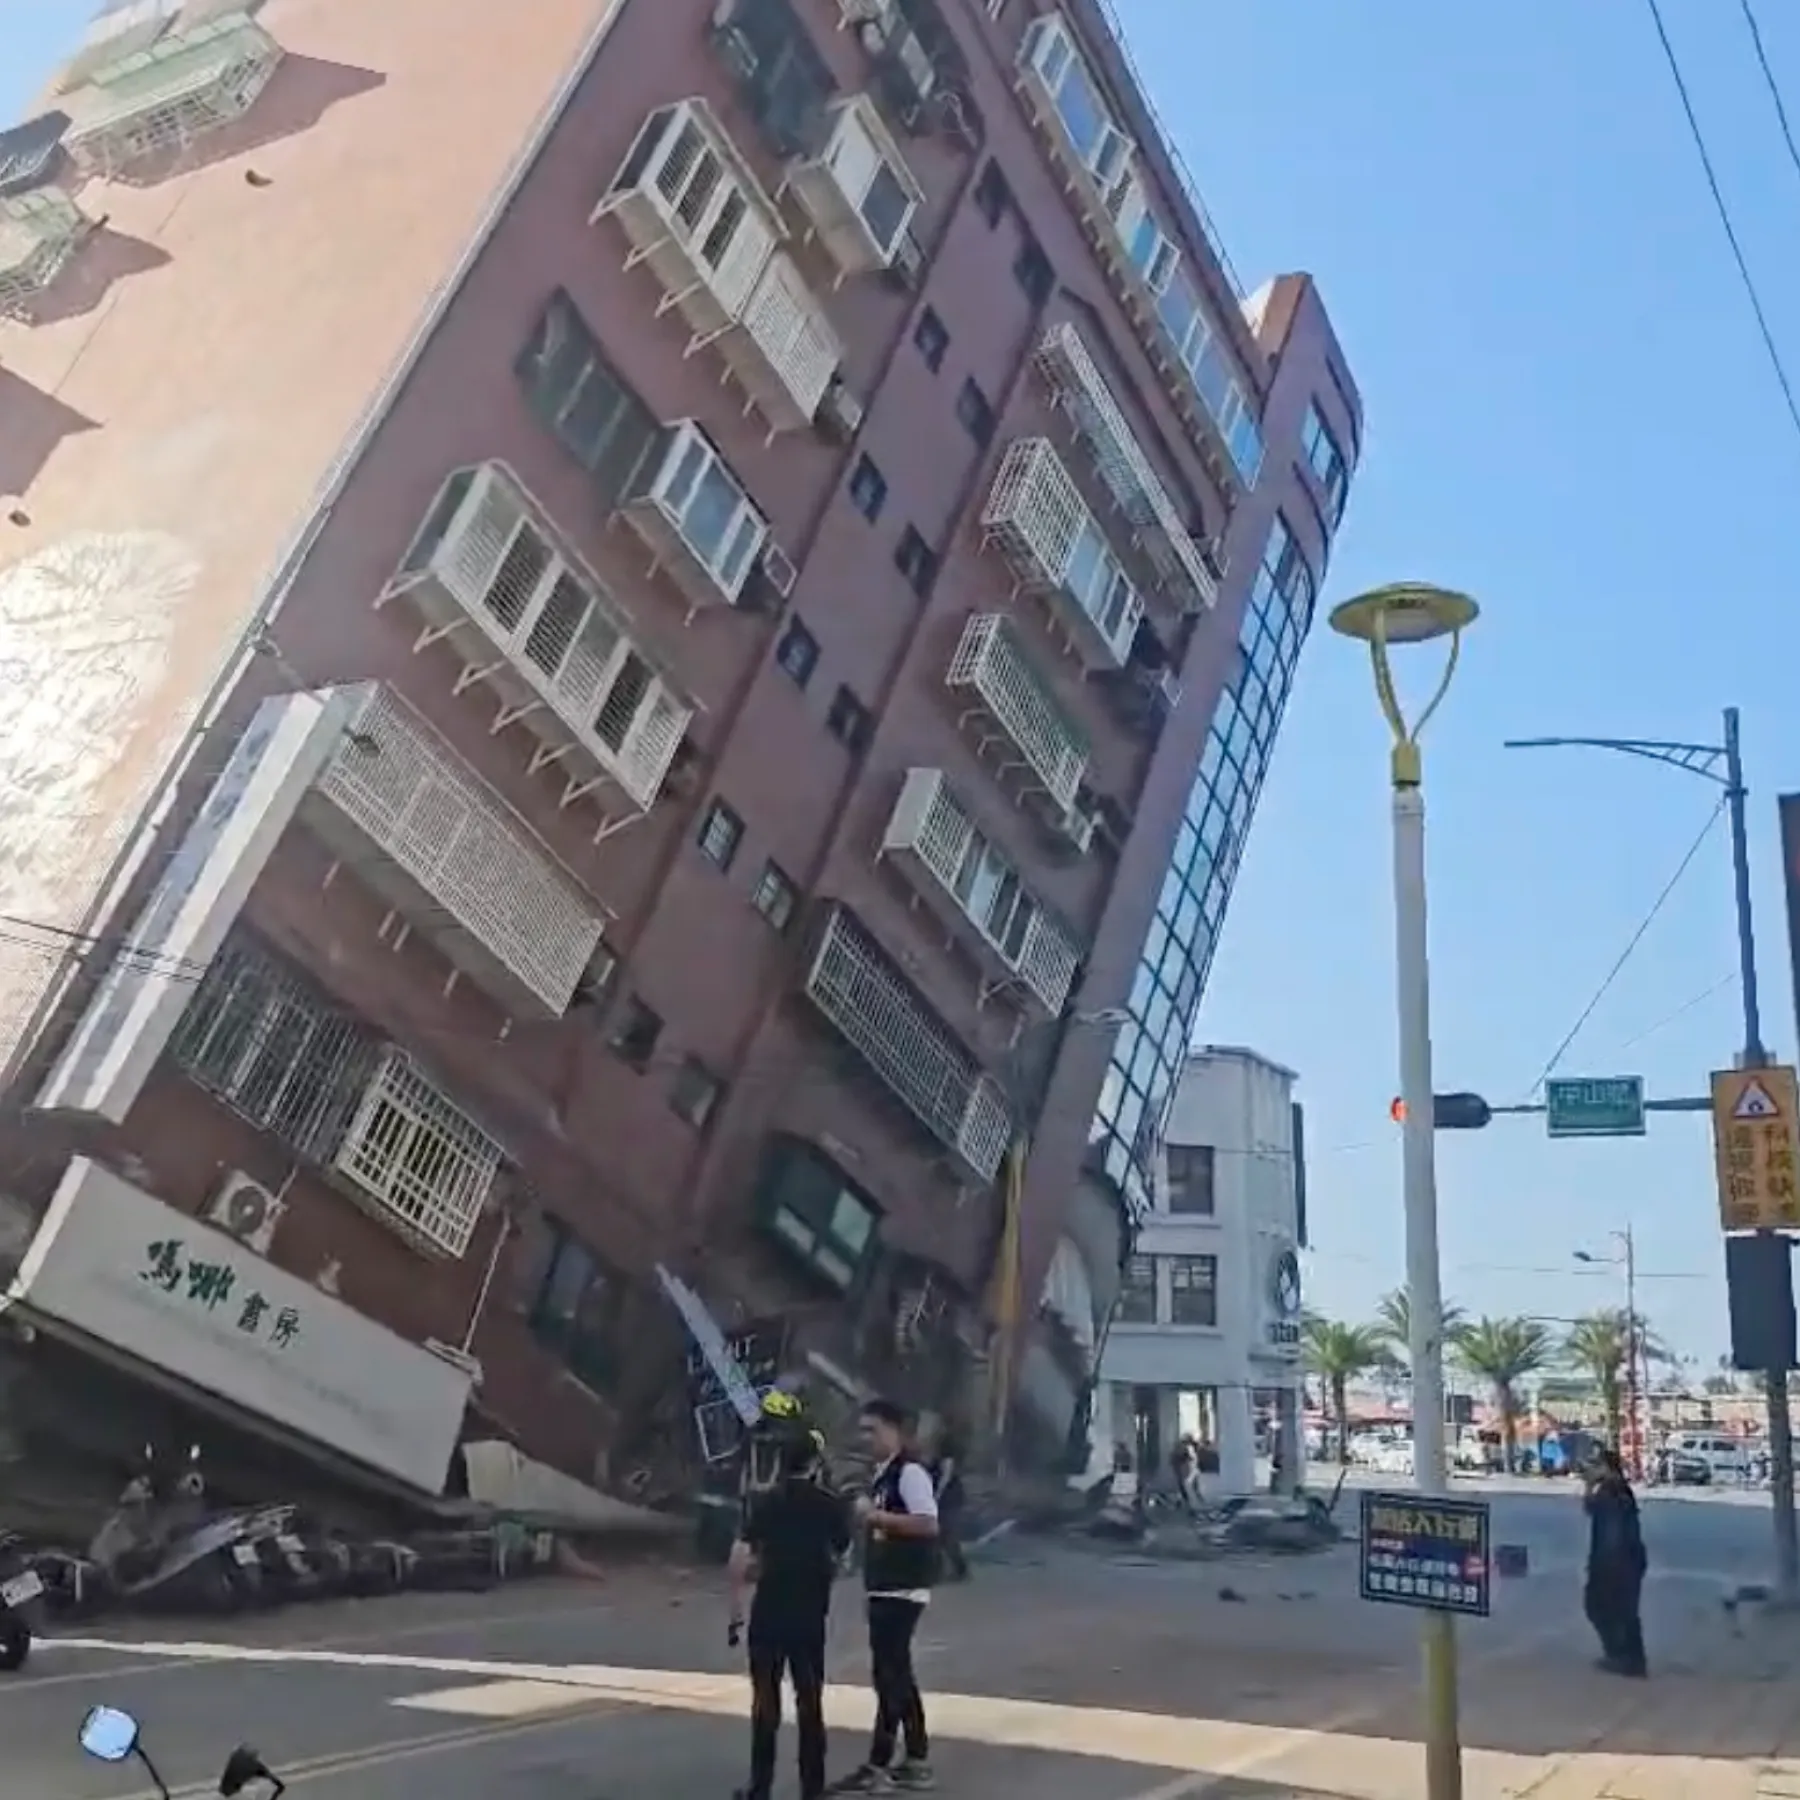 Taiwan's strongest earthquake in a quarter century rocked the island during the morning rush hour Wednesday, damaging buildings and highways and causing the deaths